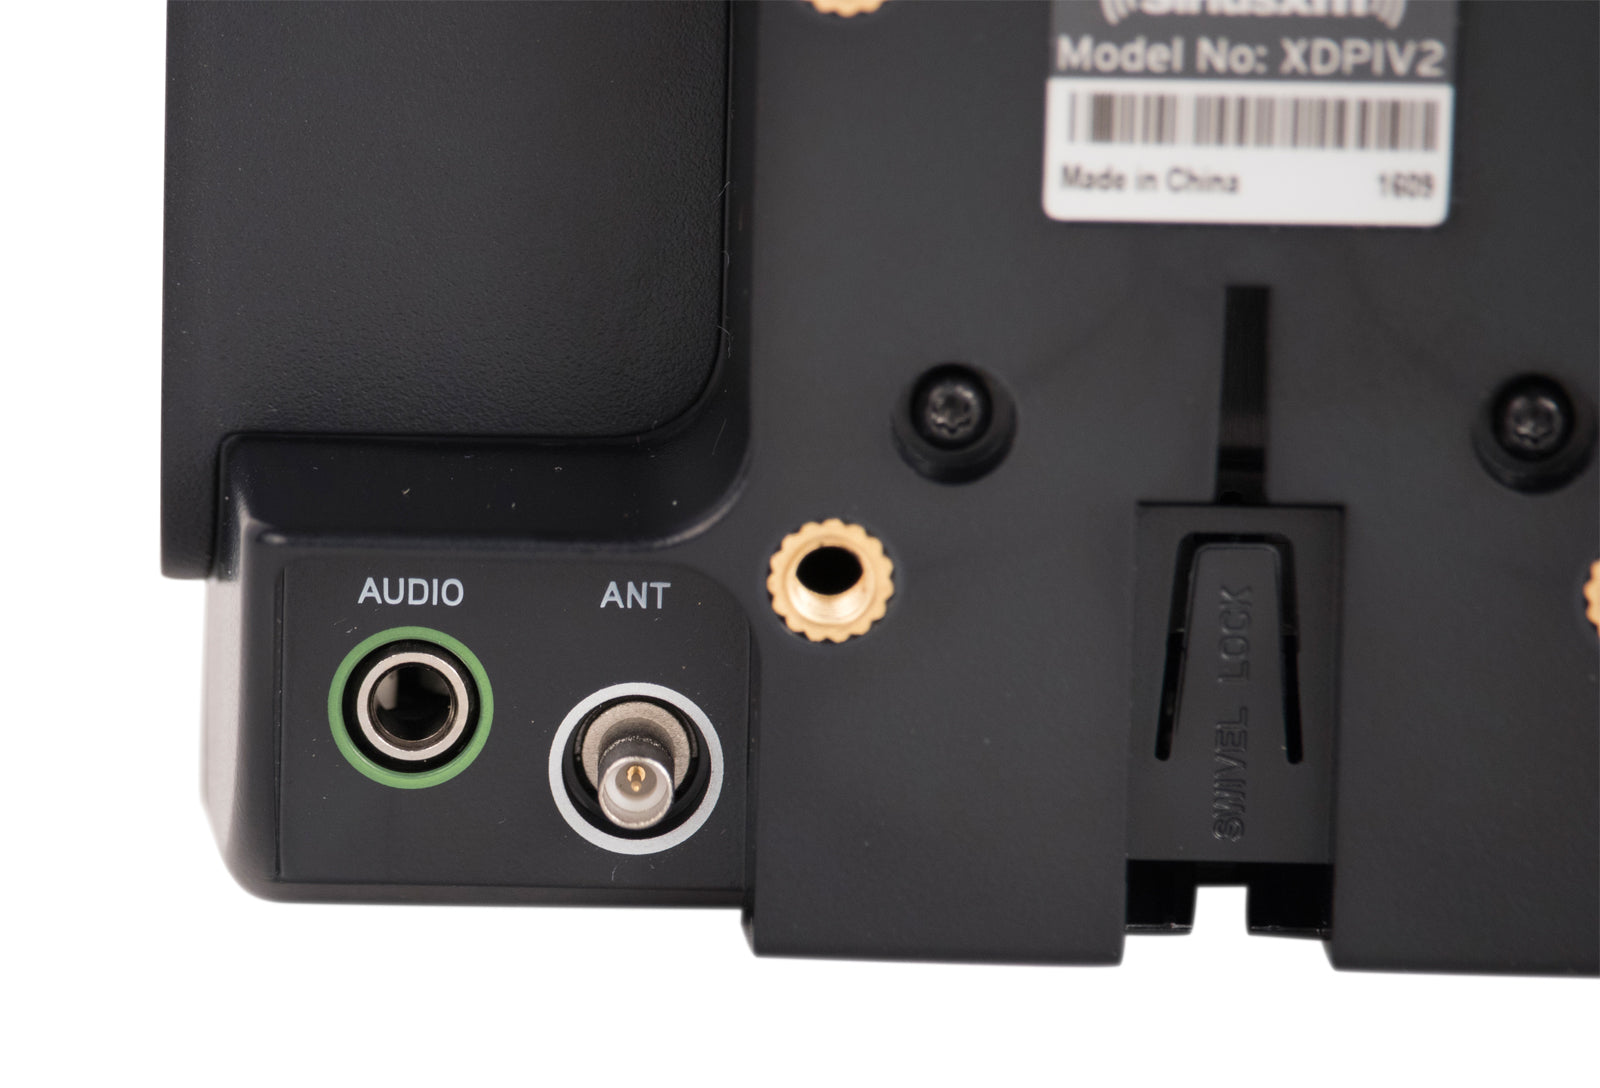 Audio and antenna ports on XDPIV2 car cradle